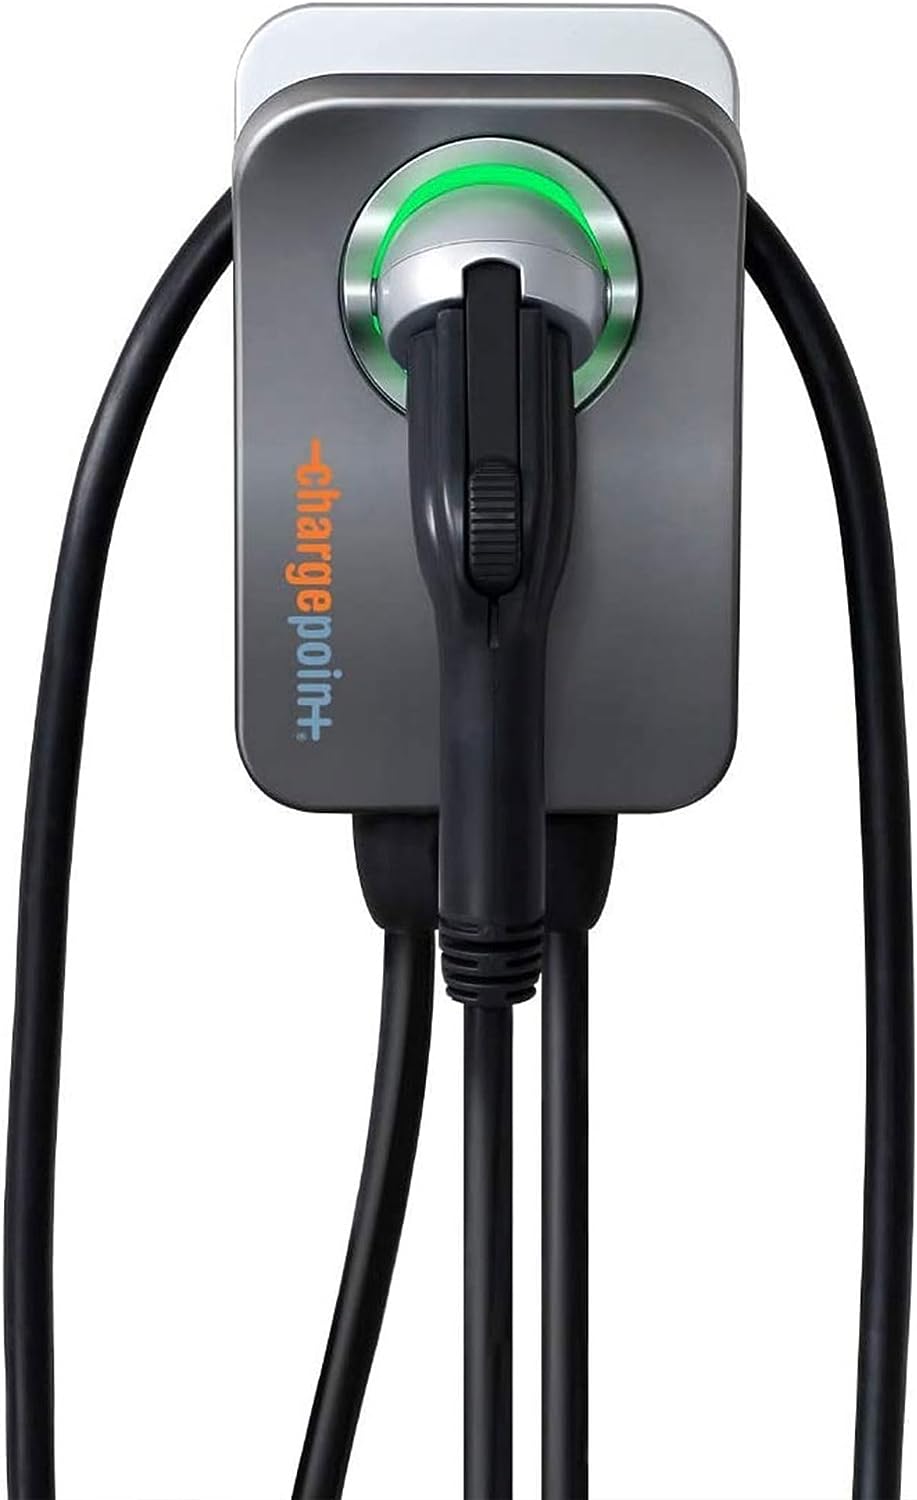 ChargePoint Home Flex Level 2 WiFi Enabled 240 Volt NEMA 6-50 Plug Electric Vehicle EV Charger for Plug in or Hardwired Indoor Outdoor Setup w/Cable $570